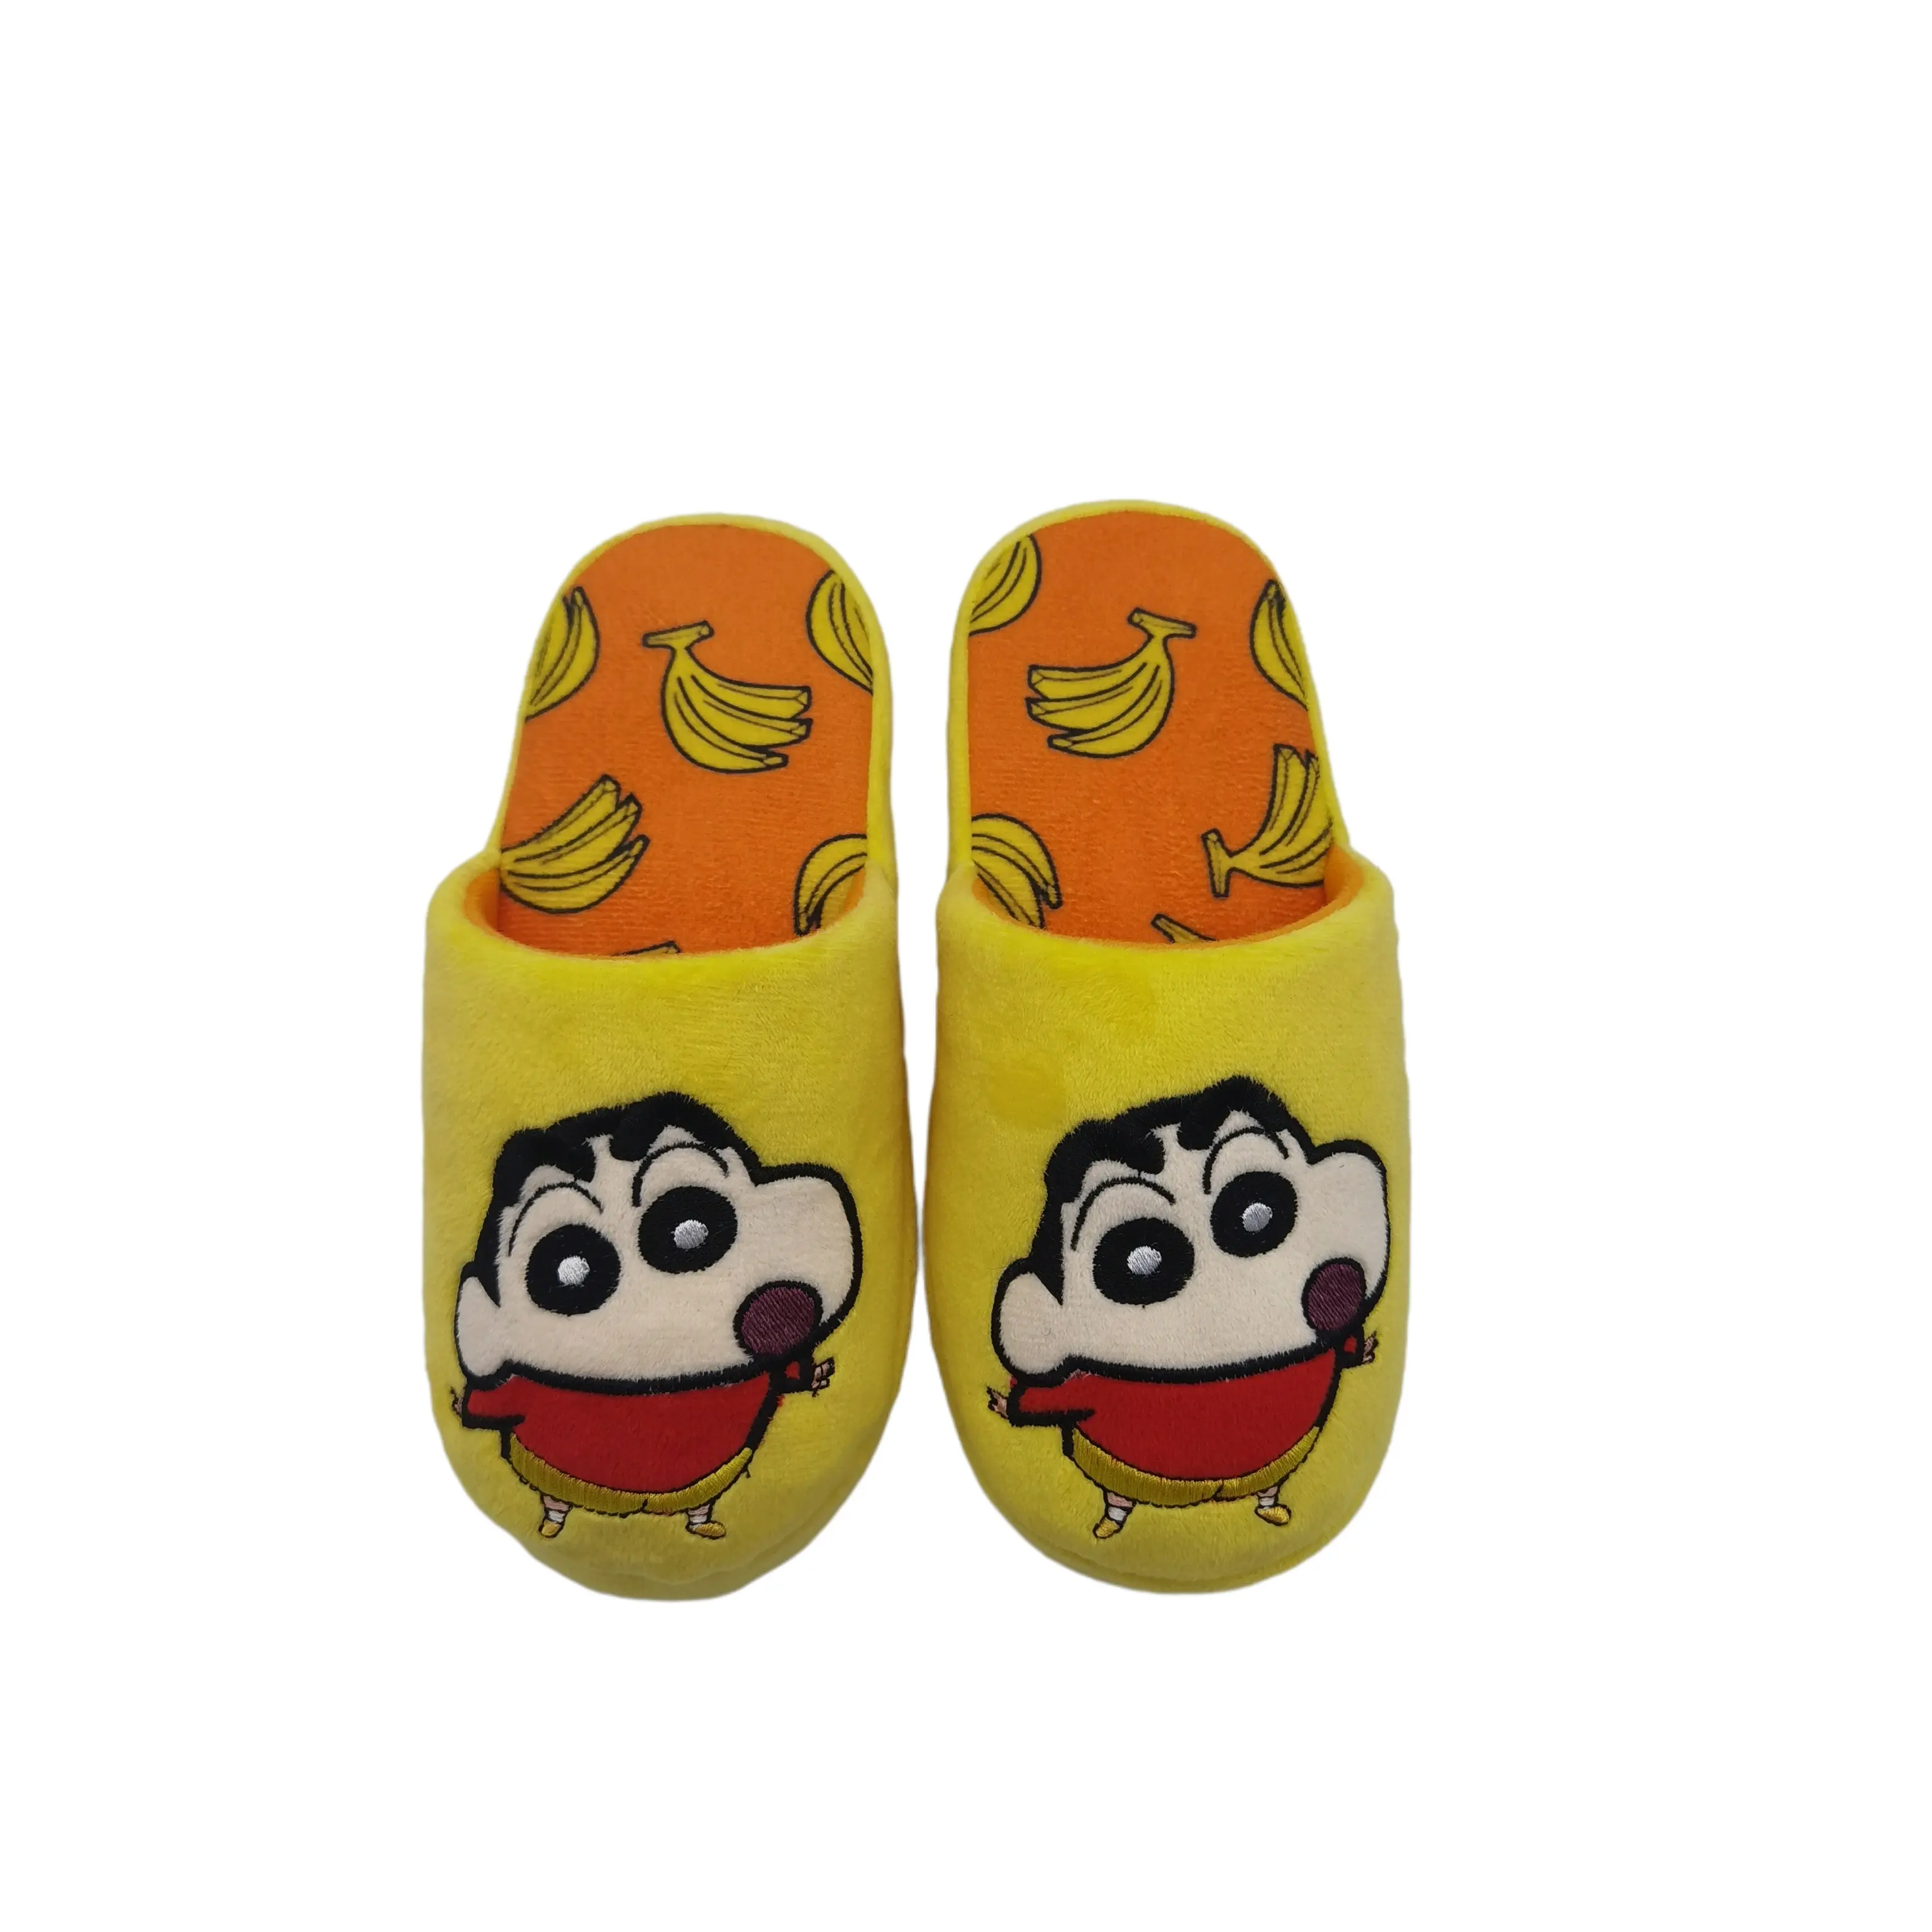 Toddler plush 3D animals design character monster winter warm child shoes indoor slippers for boys